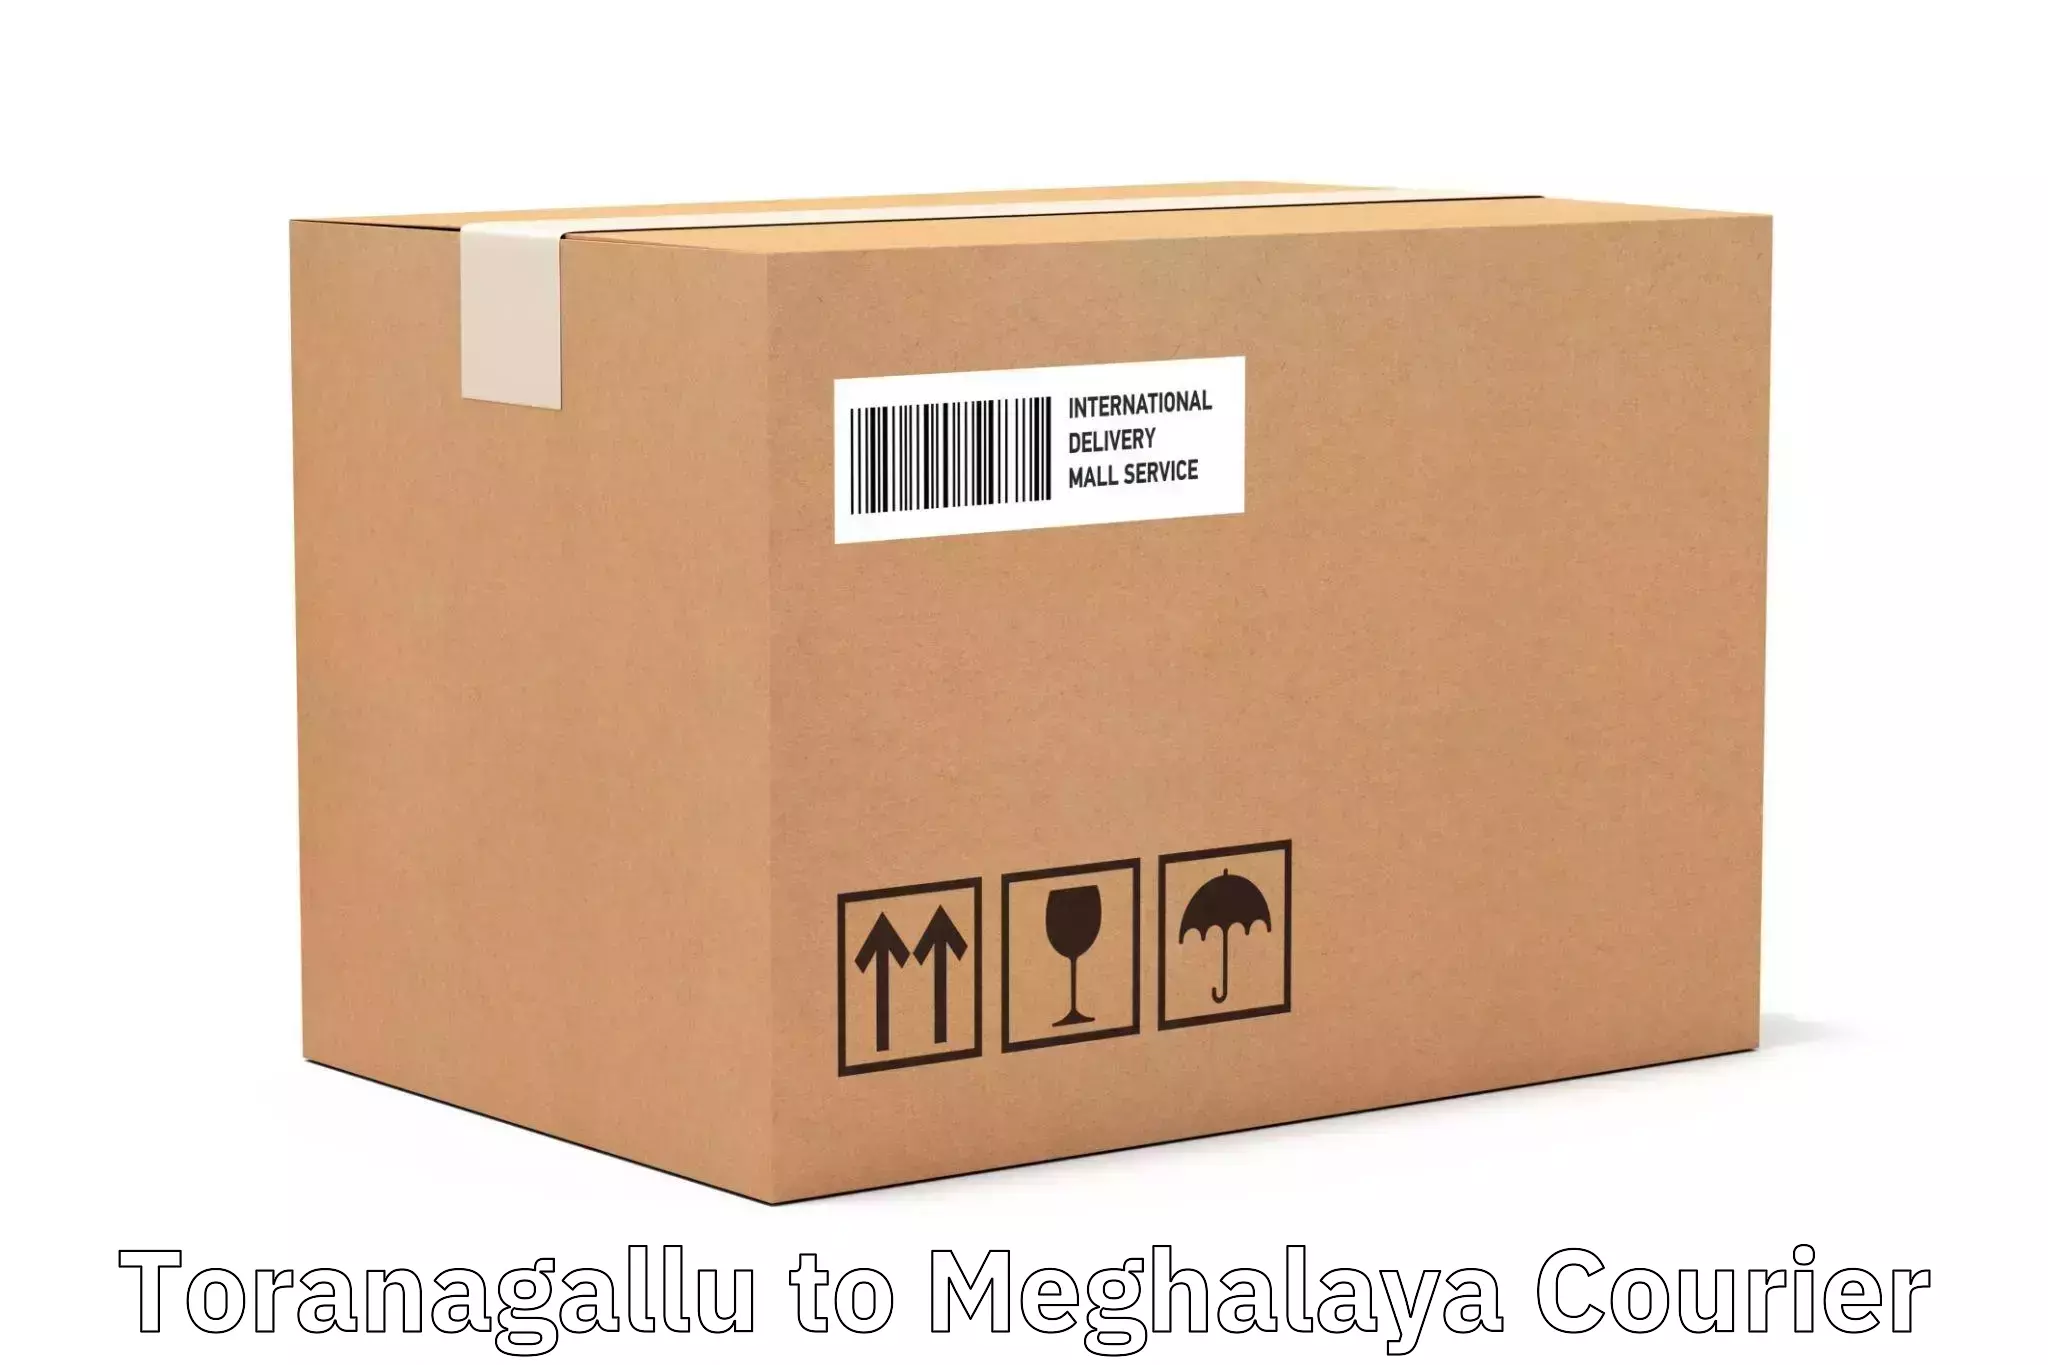 State-of-the-art courier technology Toranagallu to Tura